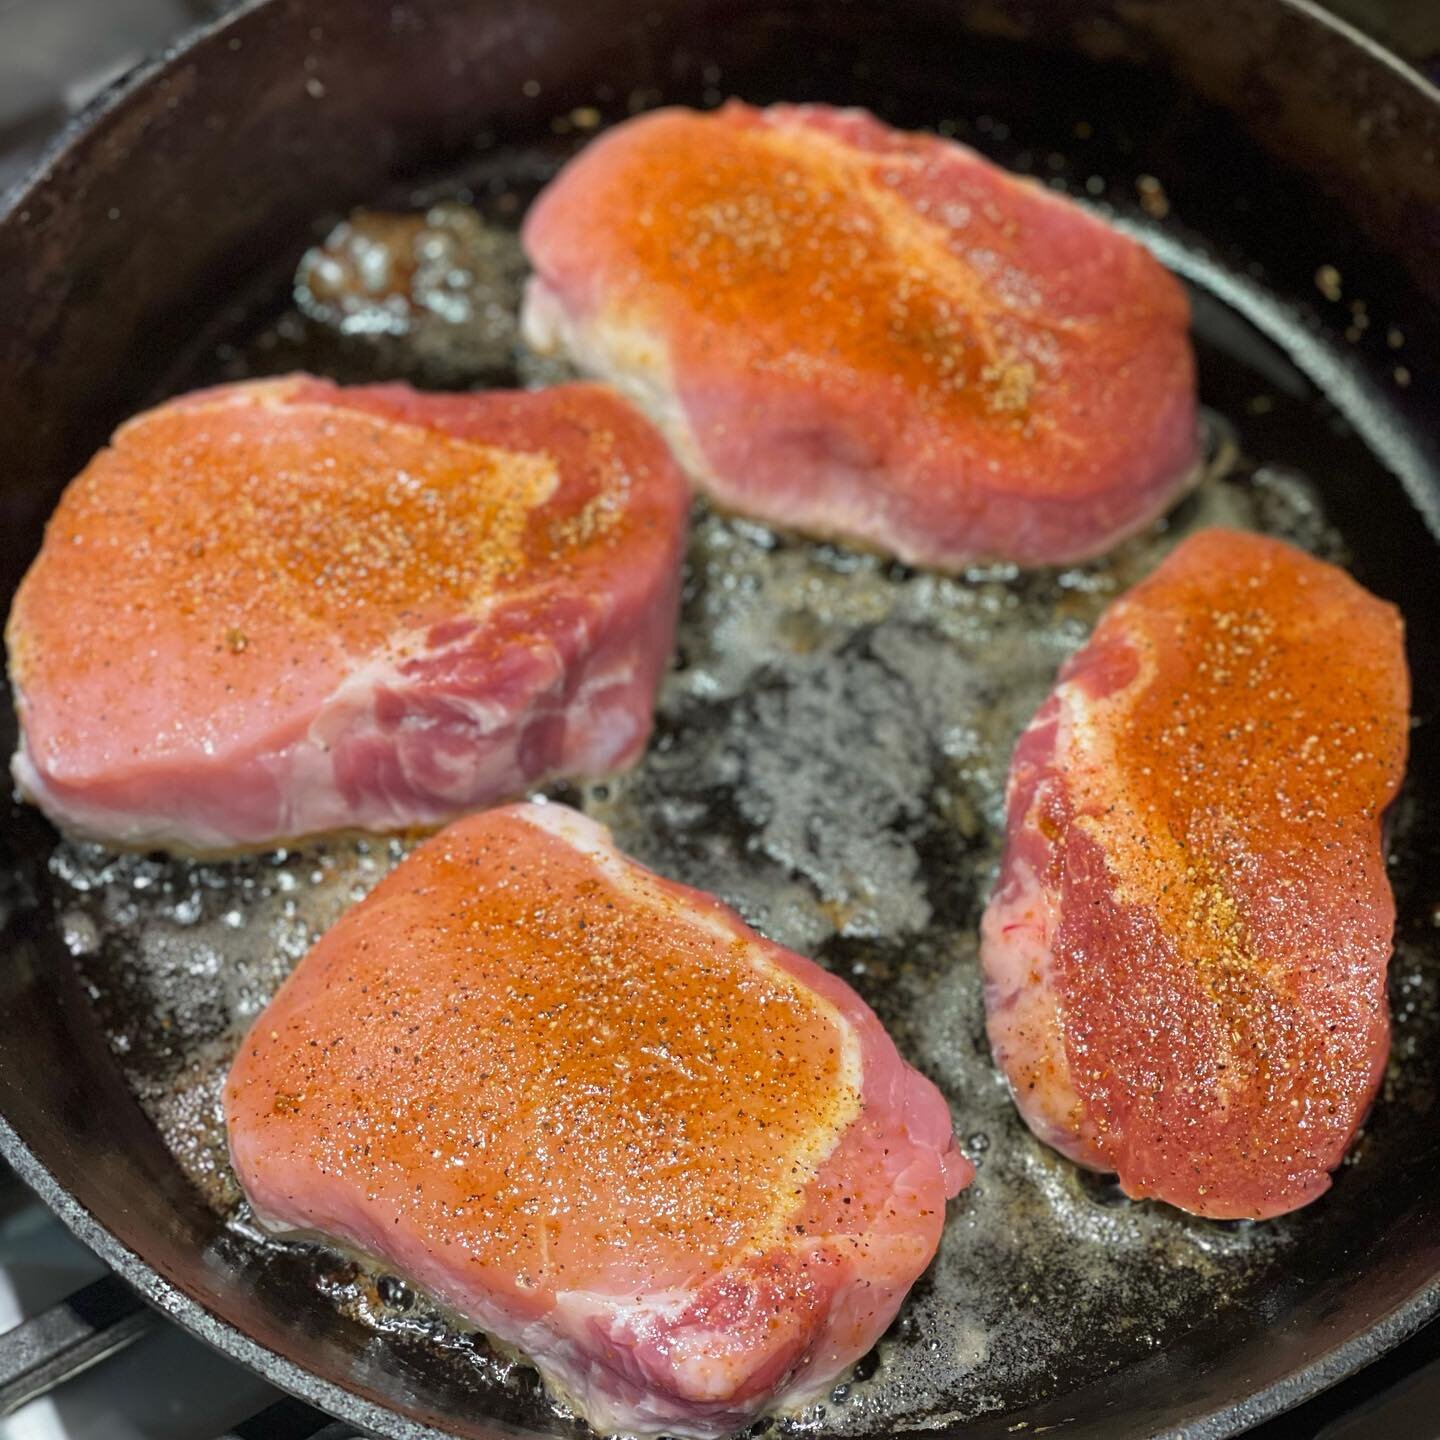 Second only to my grill. My @lodgecastiron skillet never lets me down! @hushpiggies Meat Candy pork loin was in mine tonight. #castironcooking #meatcandy